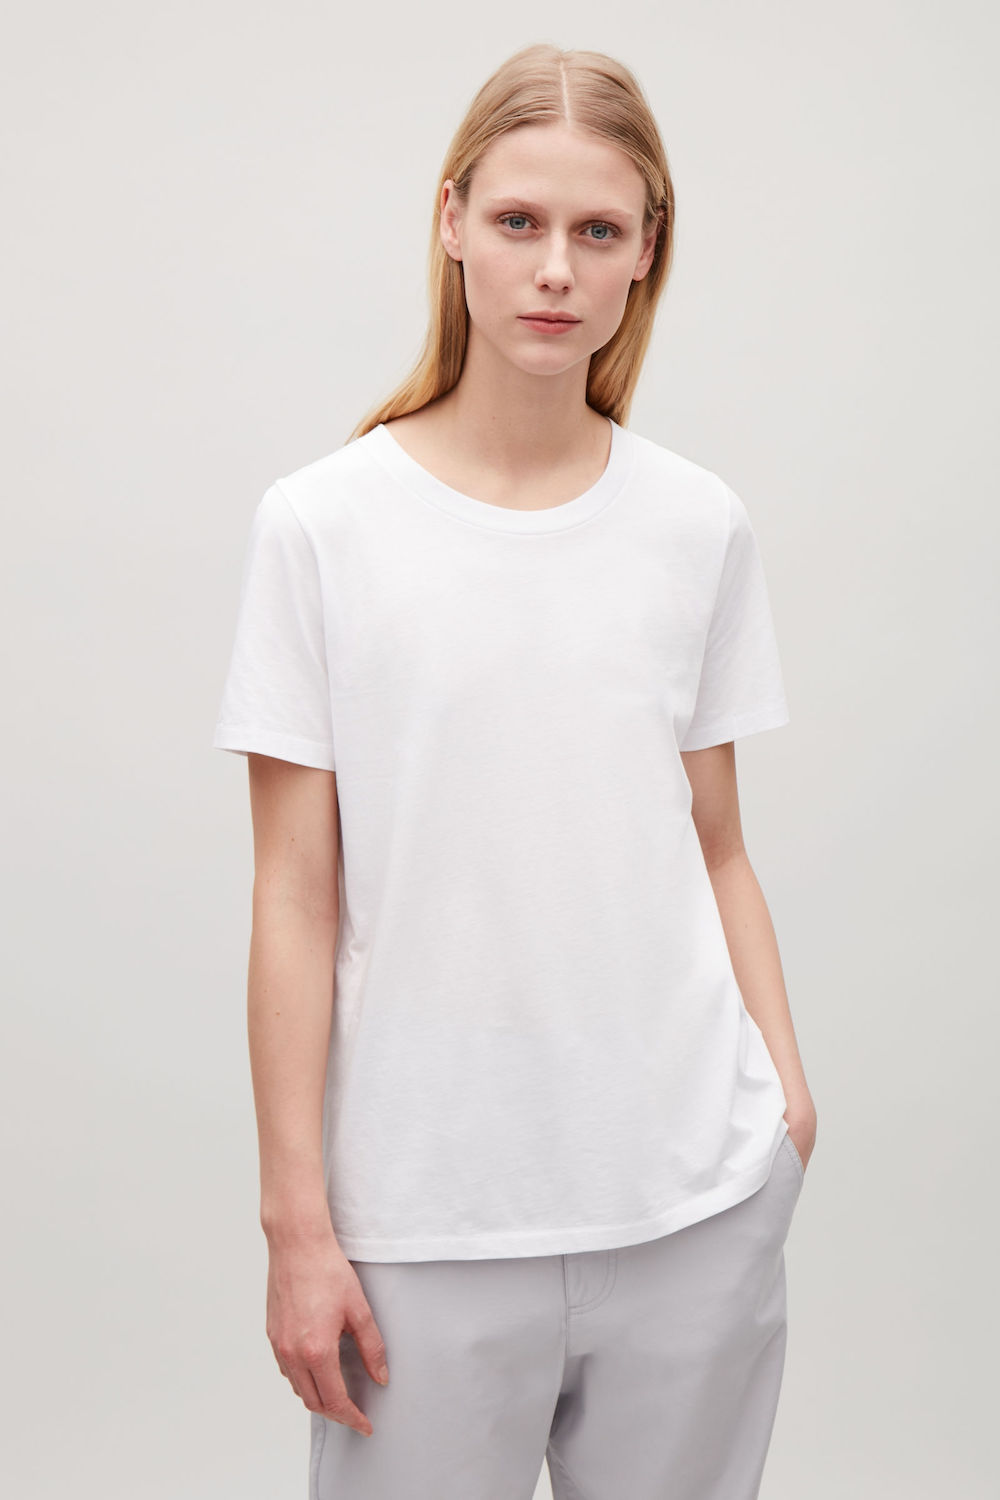 12 Best White T-Shirts to Wear With Everything - theFashionSpot